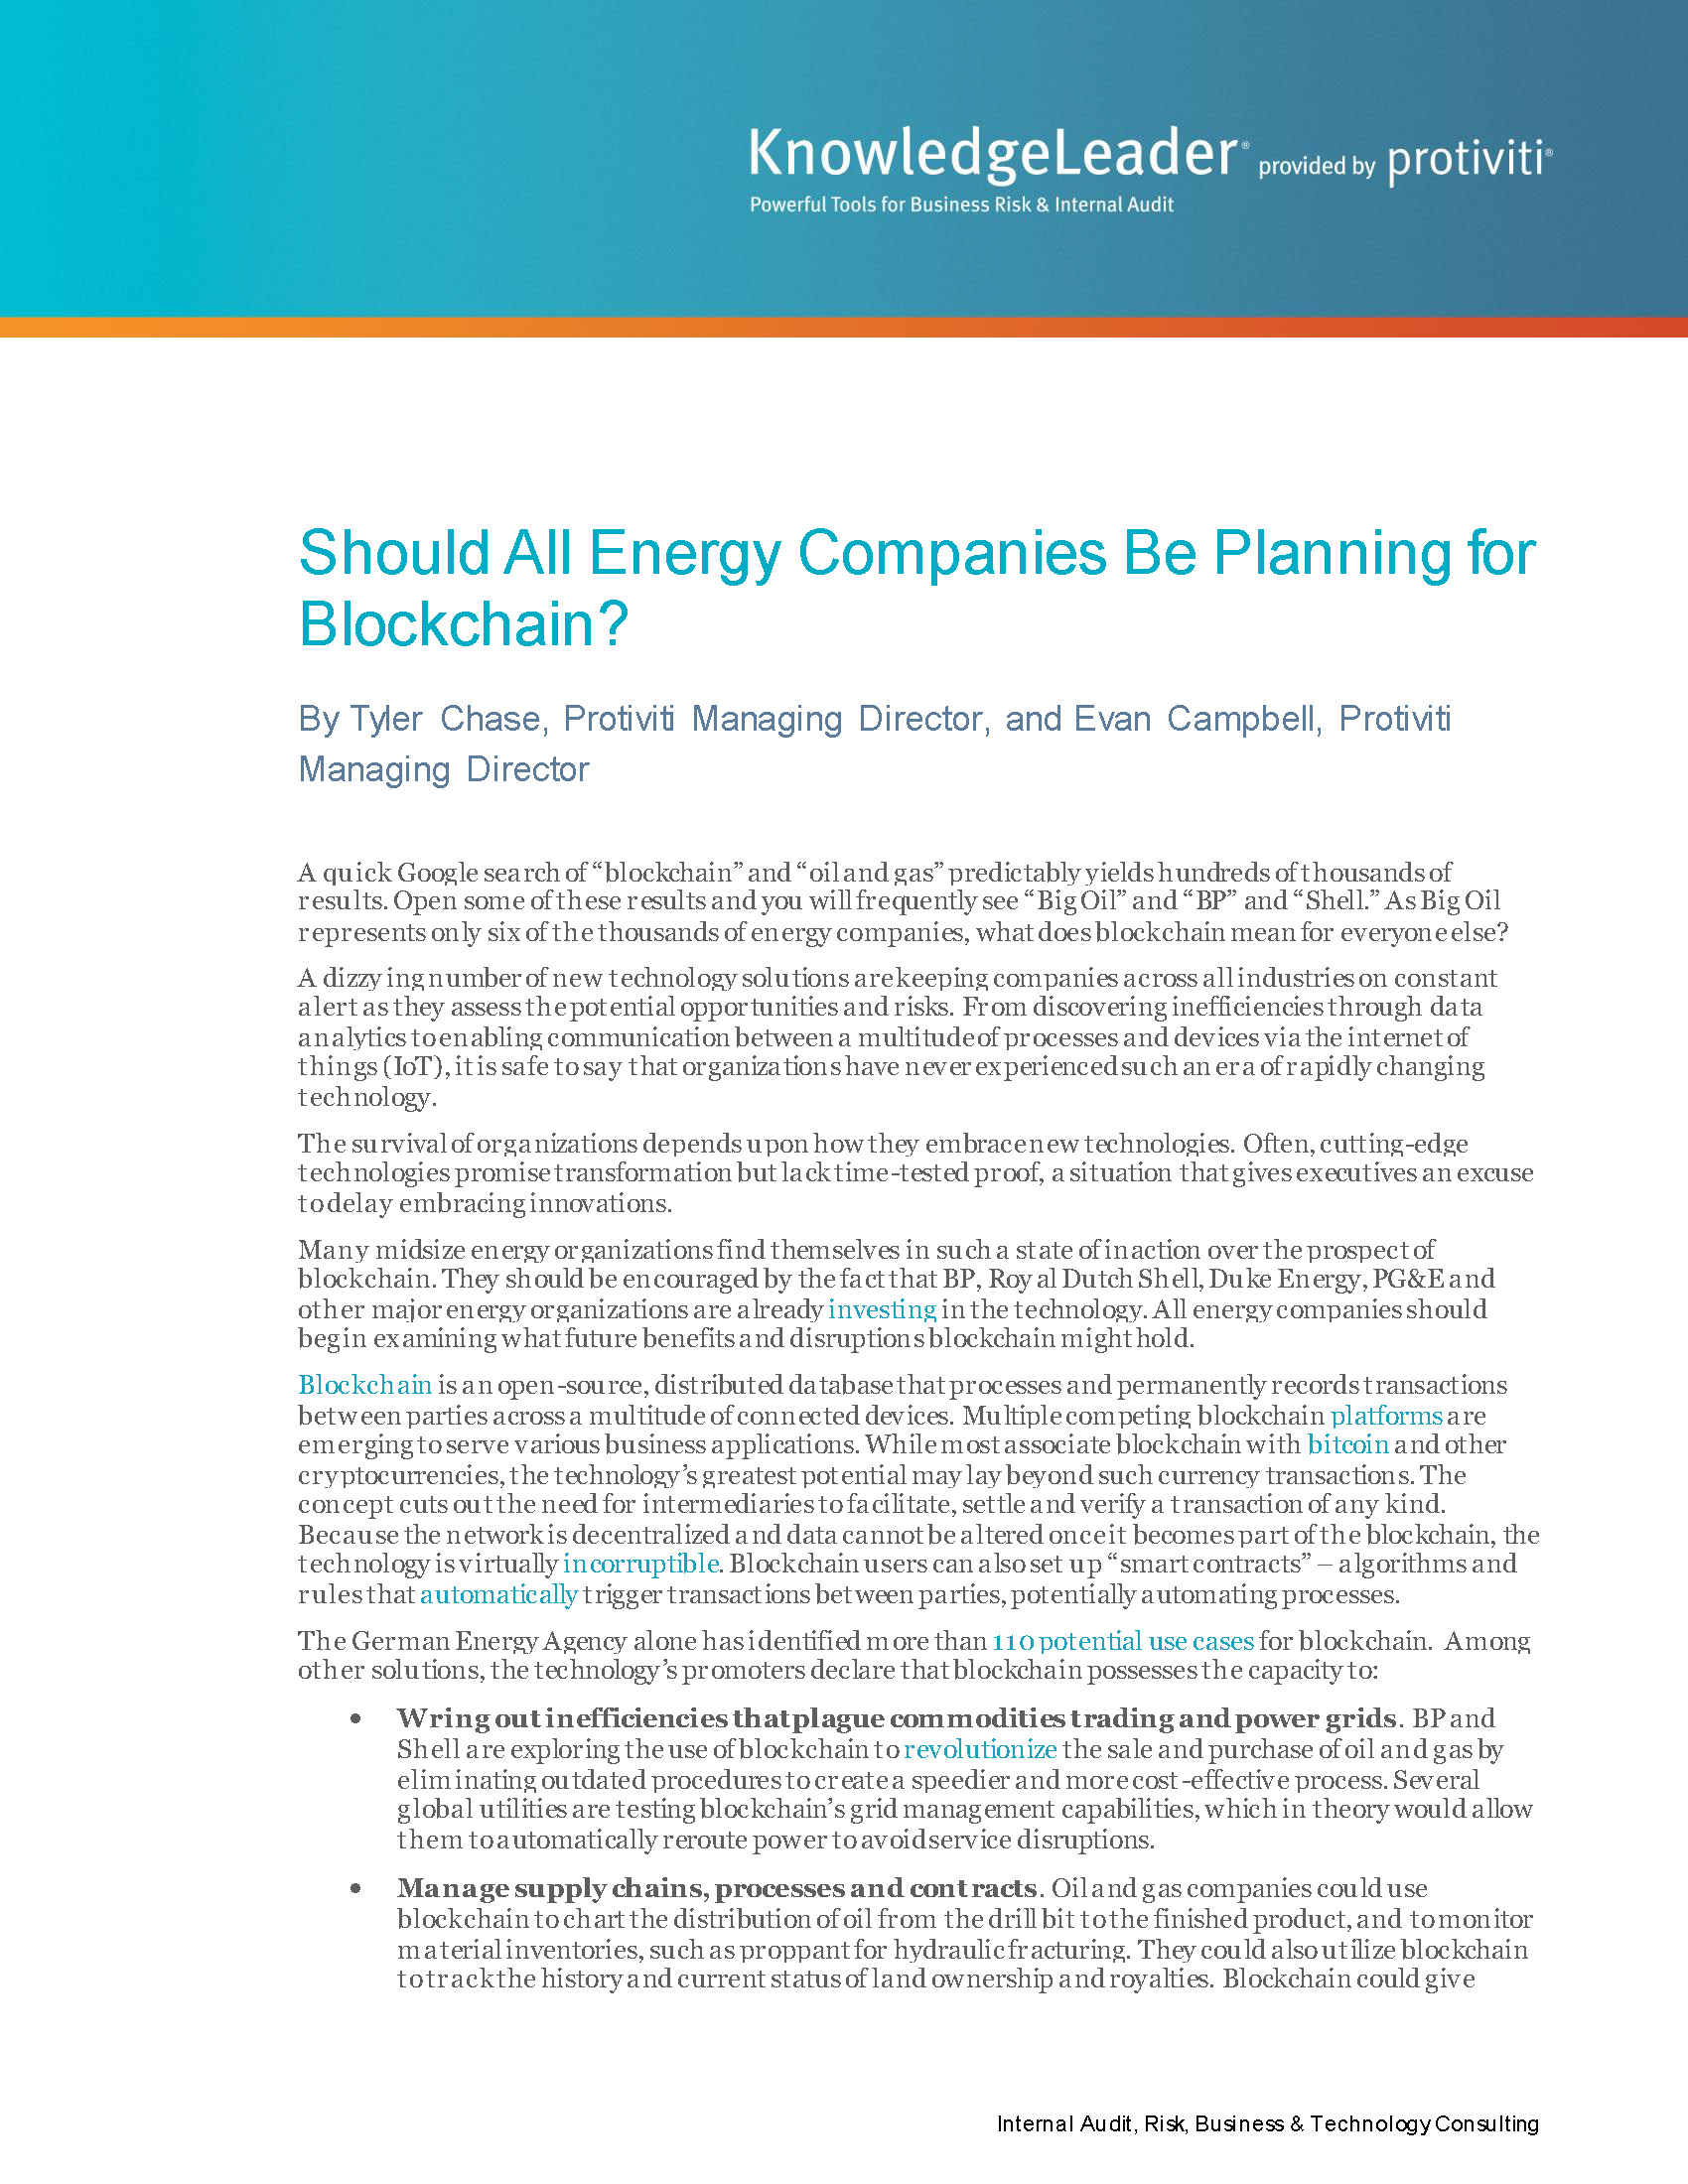 Screenshot of the first page of Should All Energy Companies Be Planning for Blockchain